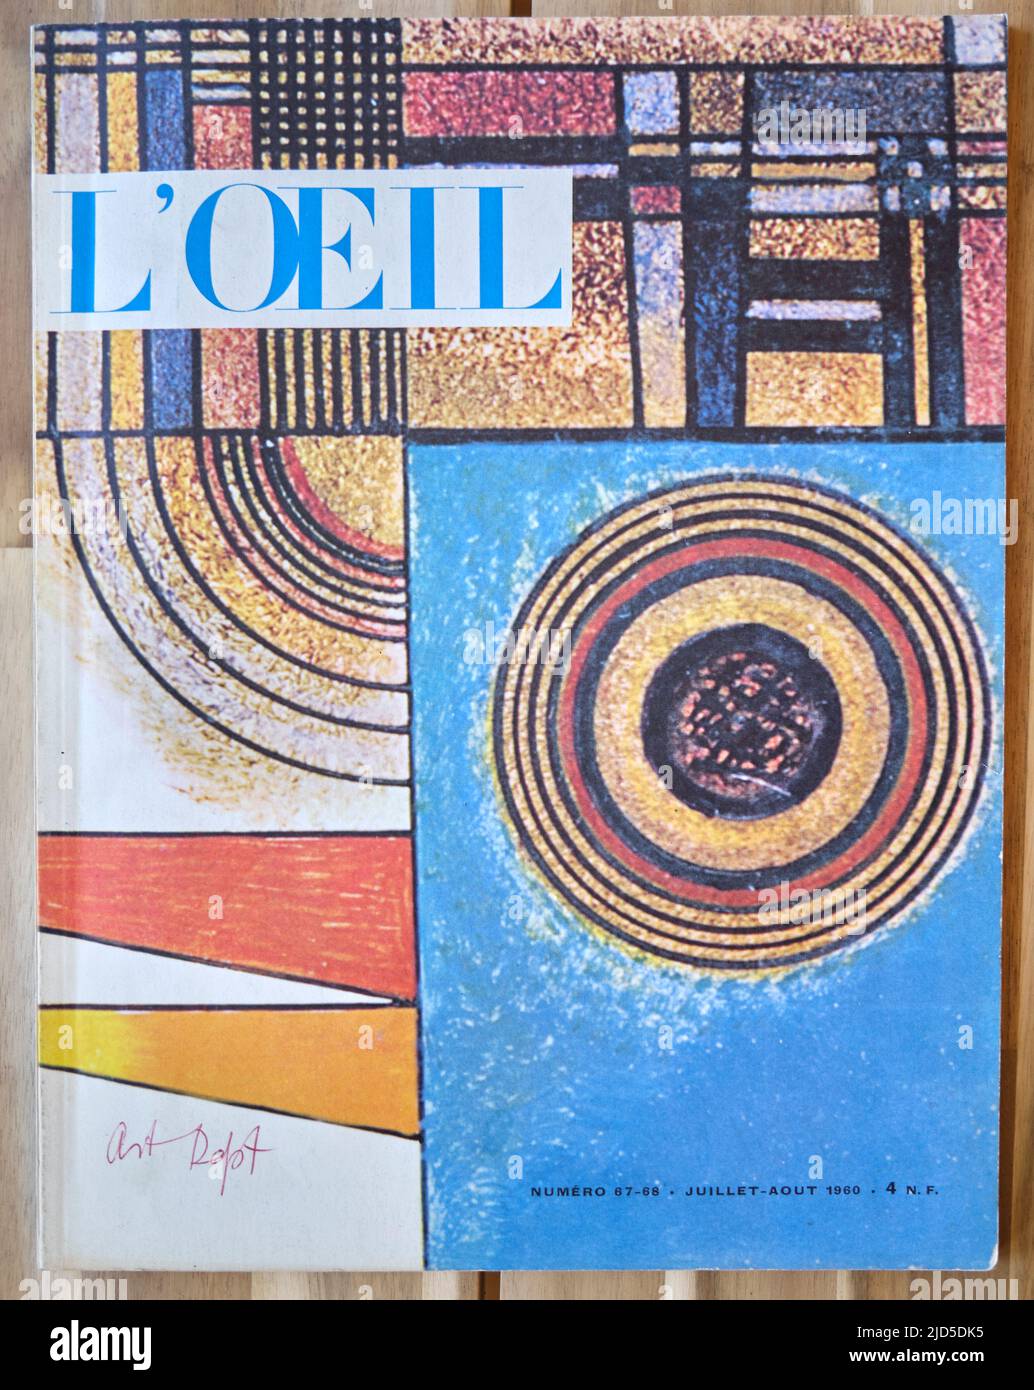 Front Cover of an old 1950s French L'Oeil Art Magazine Stock Photo